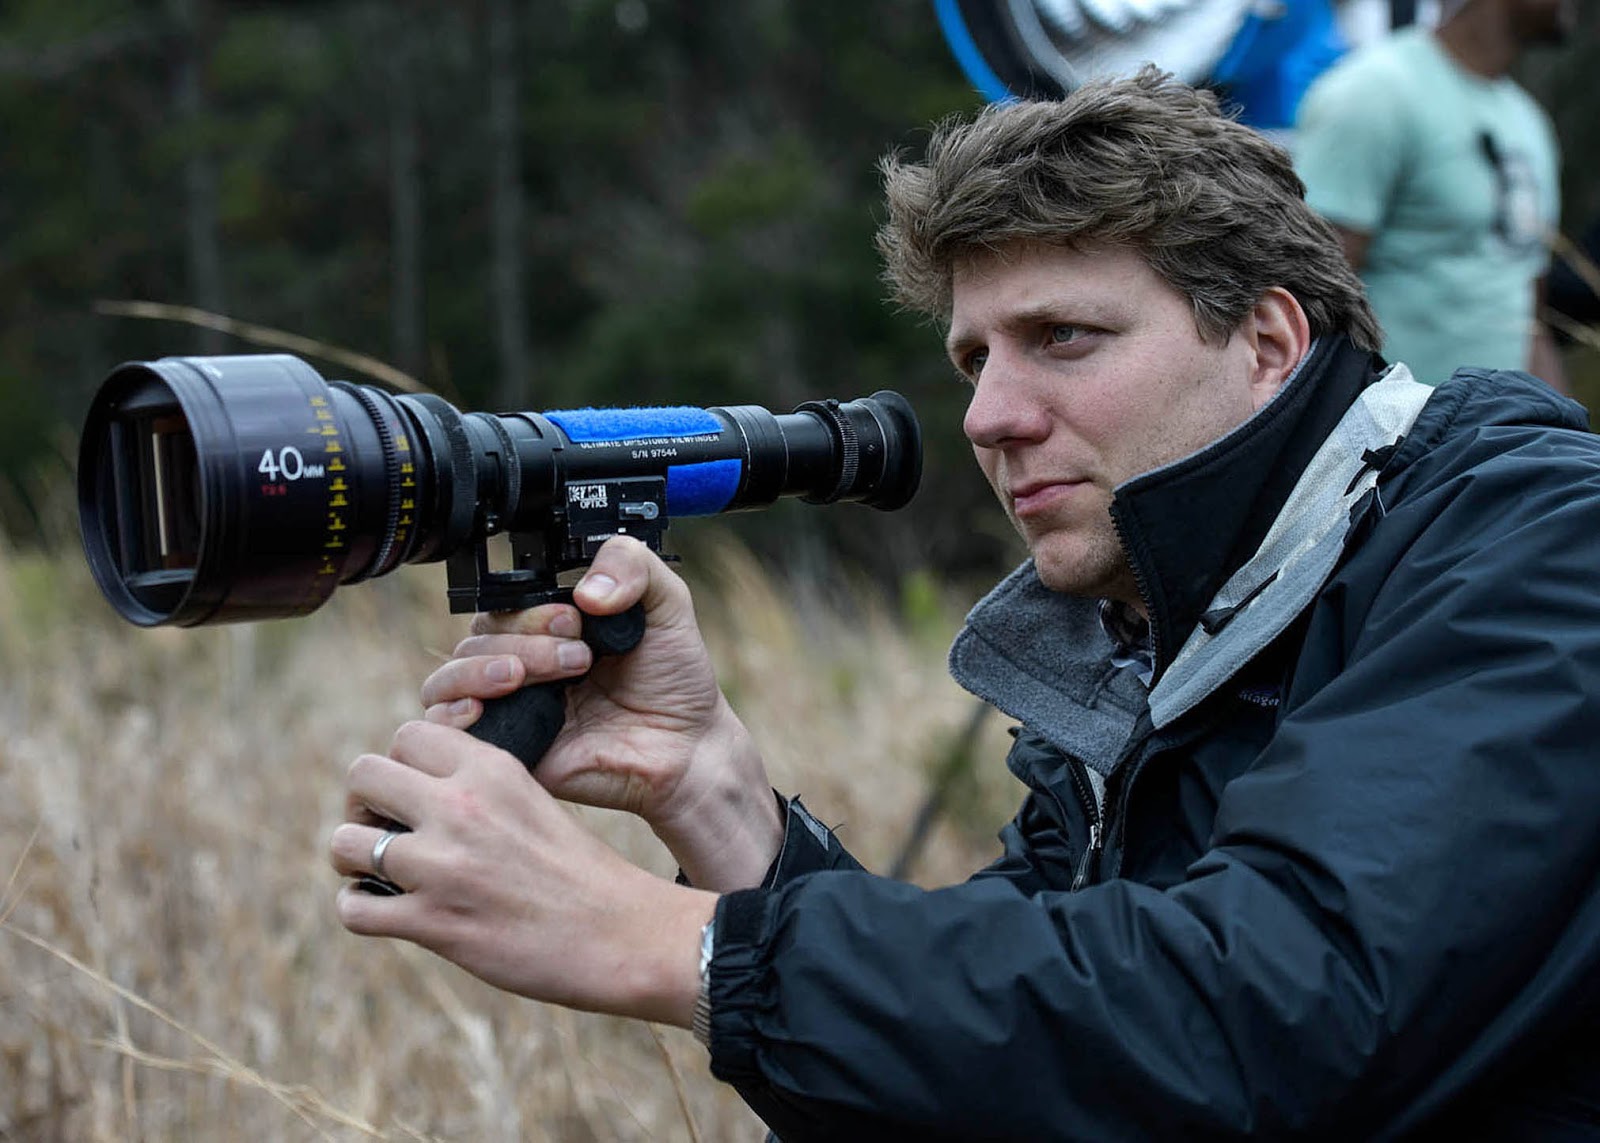 A Quiet Place spinoff loses director Jeff Nichols